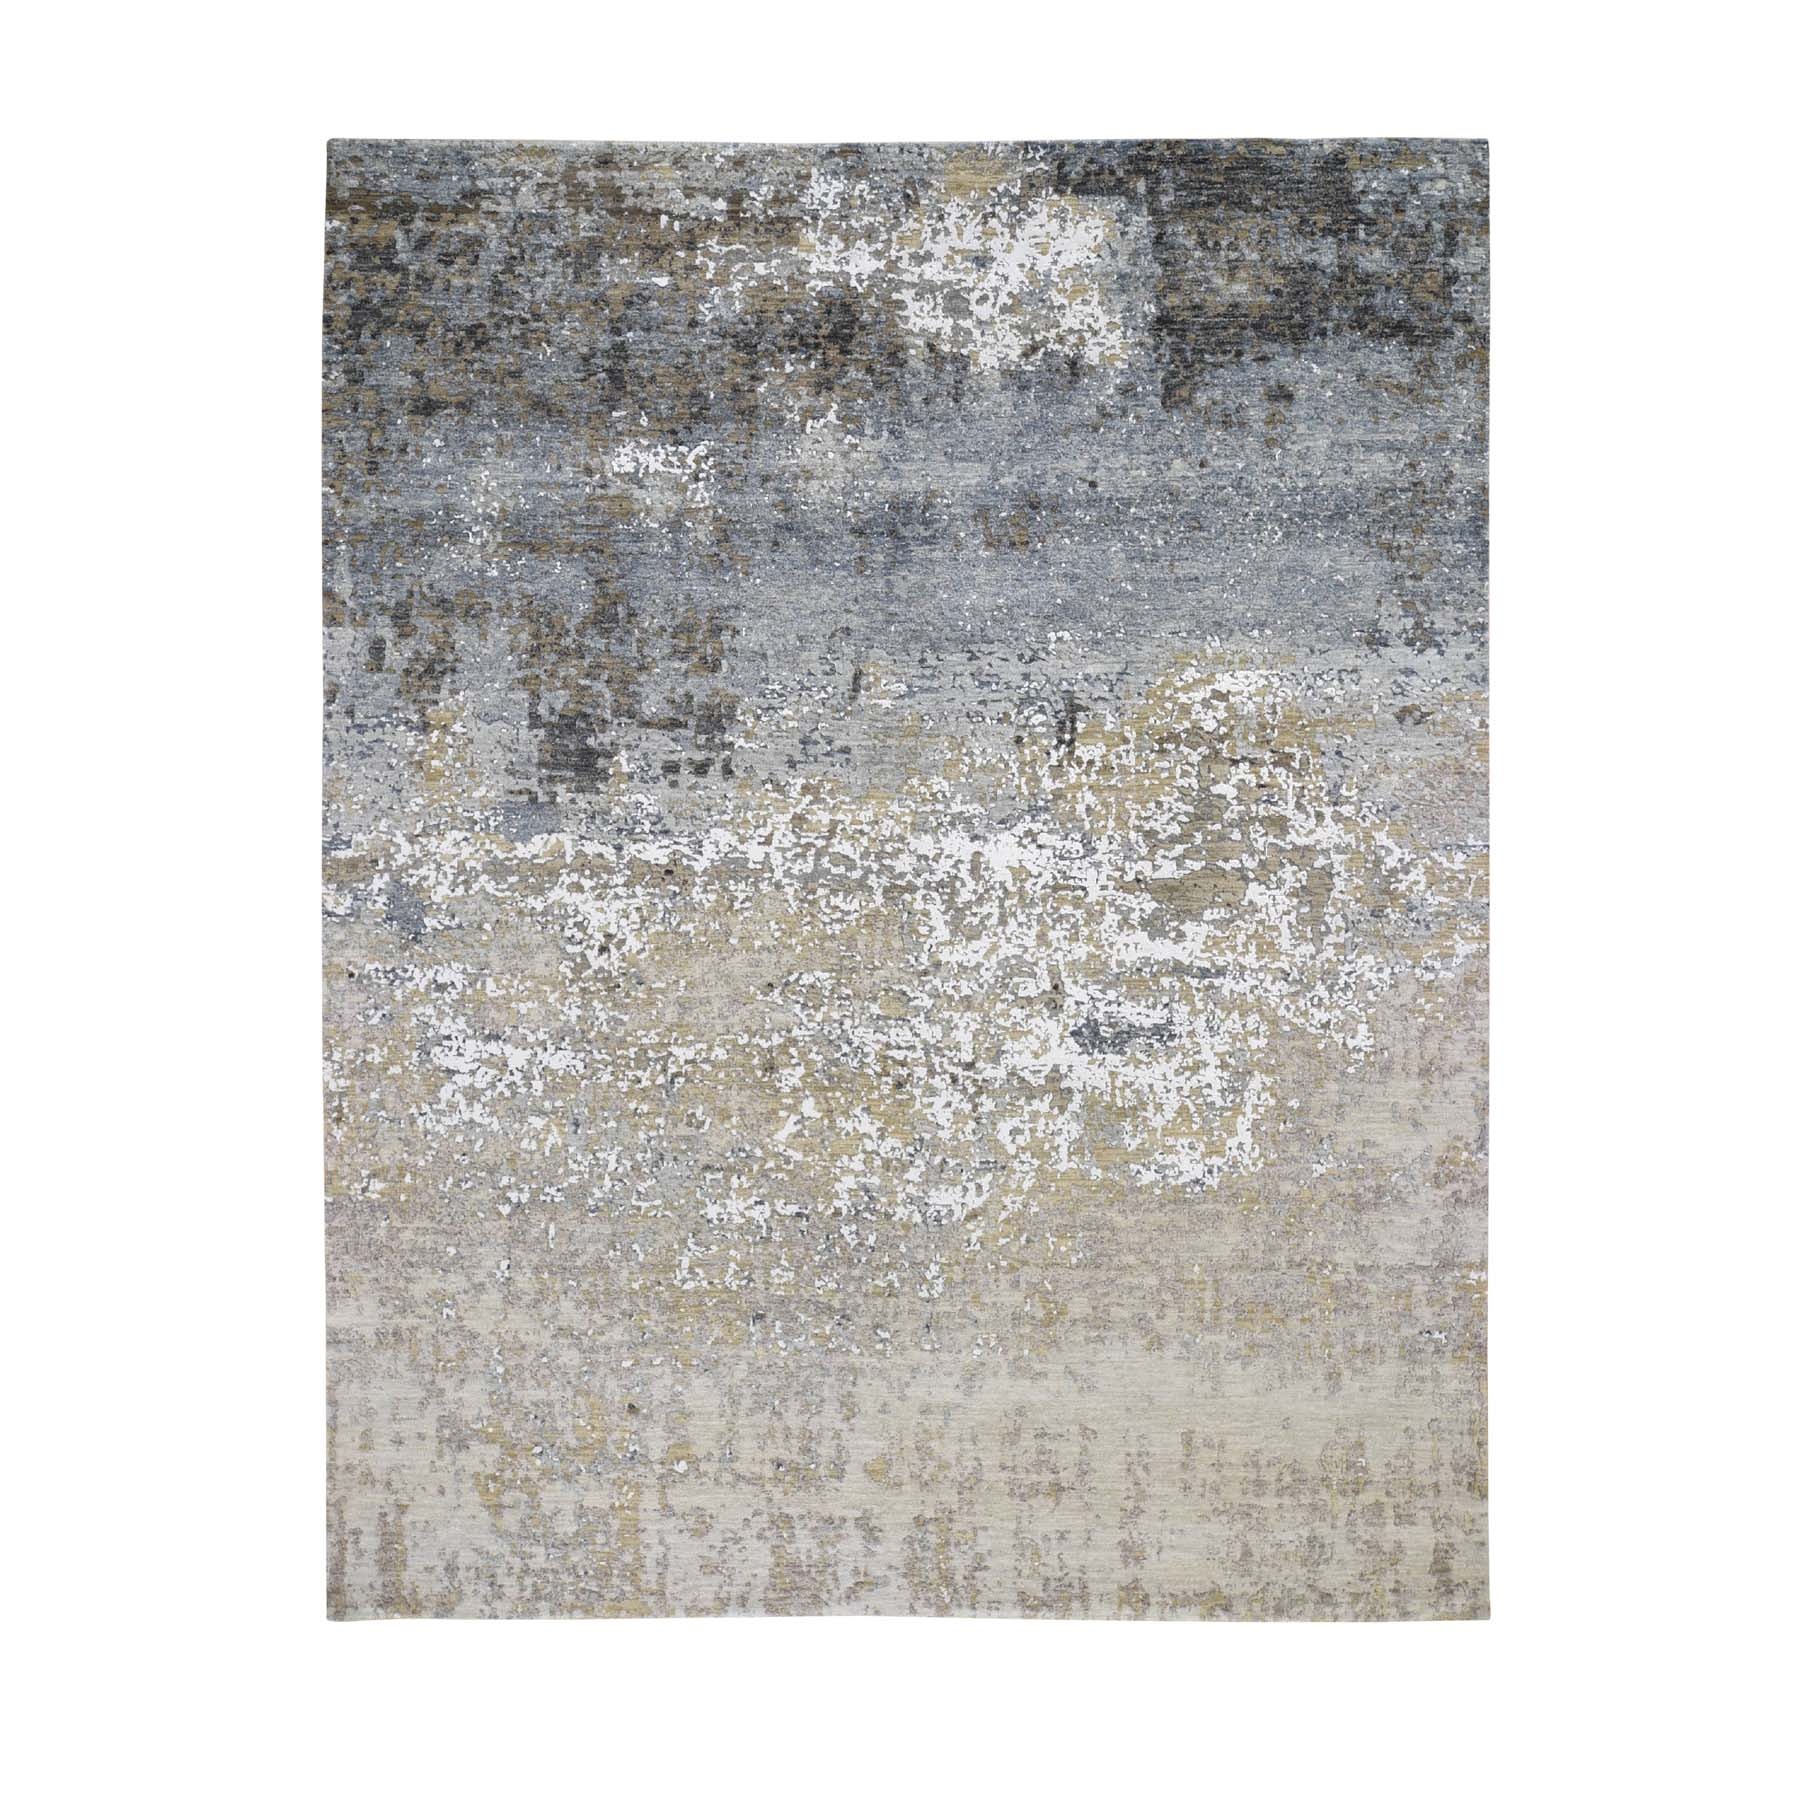 8-x10-2  Ivory Abstract Design Wool and Silk Hi-Low Pile Denser Weave Hand Knotted Oriental Rug 